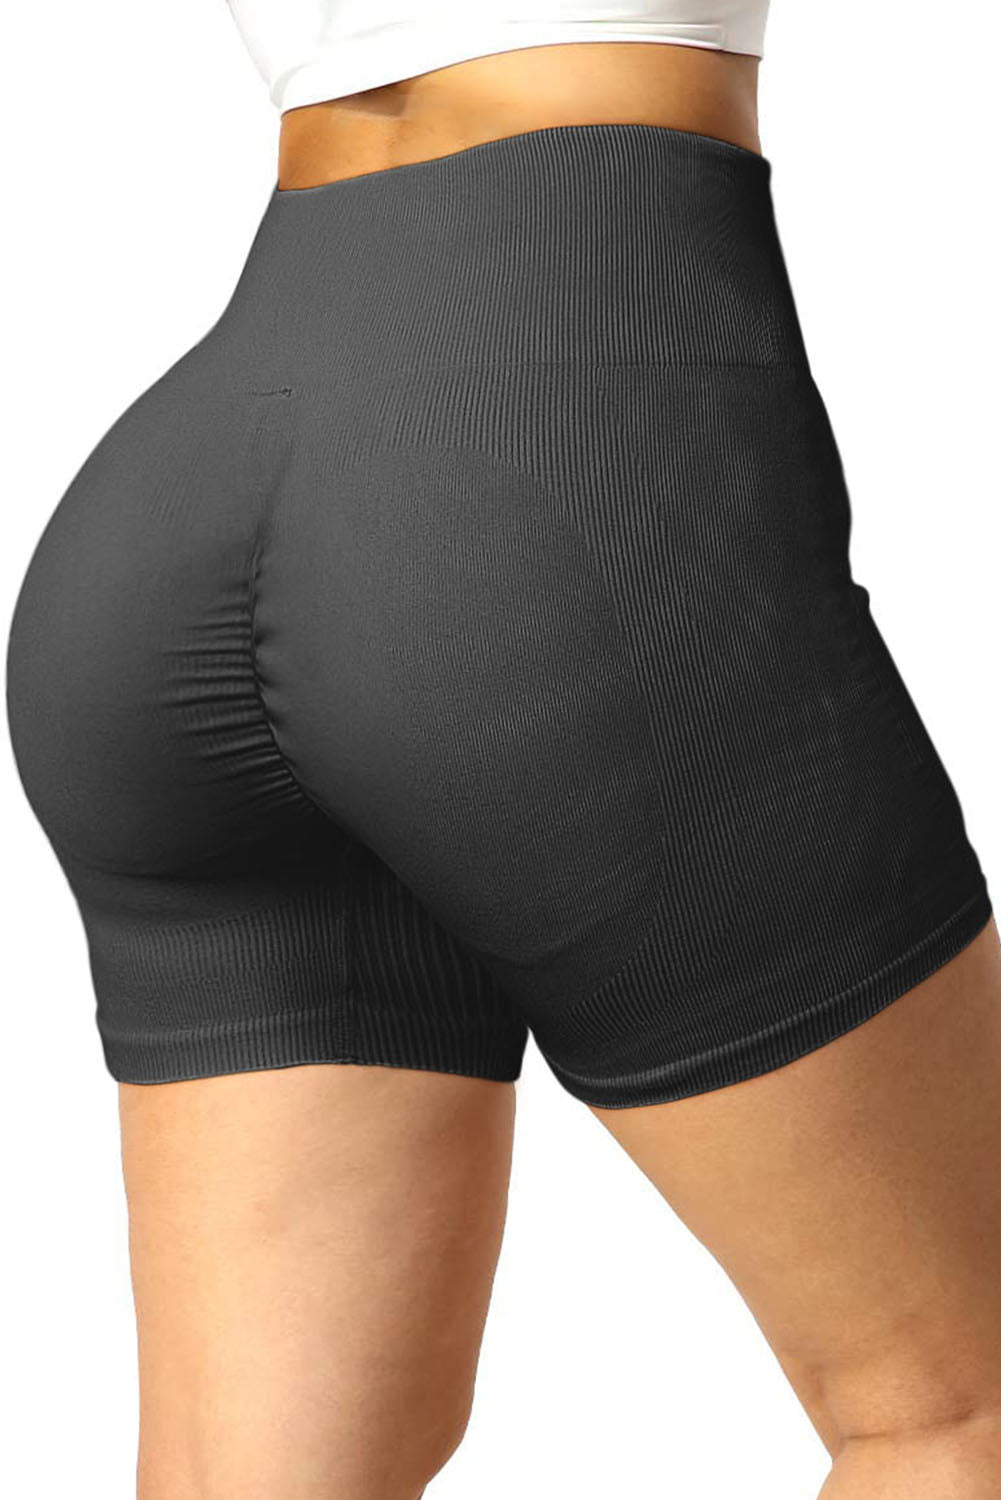 Ribbed Sports Shorts - Black / S - Women’s Clothing & Accessories - Shorts - 4 - 2024